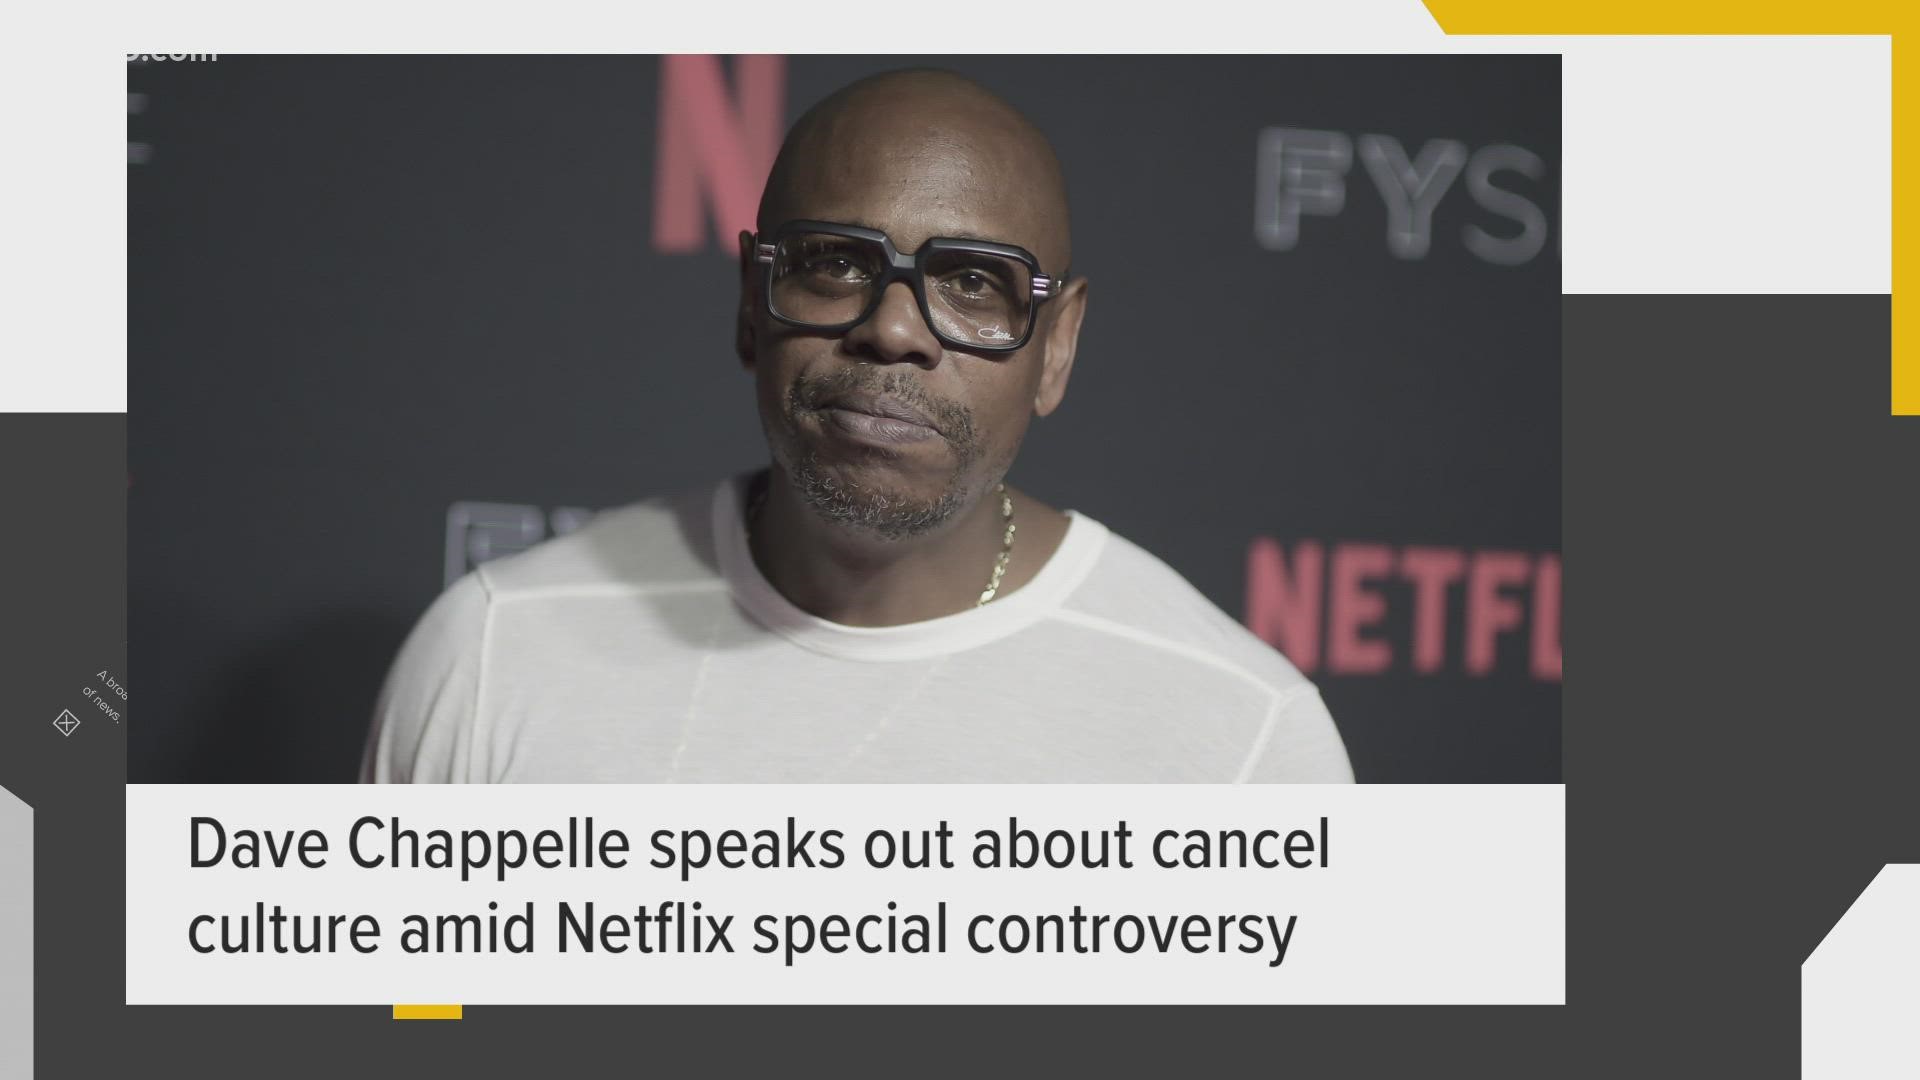 Dave Chapelle's latest Netflix special had cause a lot of controversy in the transgender community. We spoke to a local comedian who shares her thoughts.